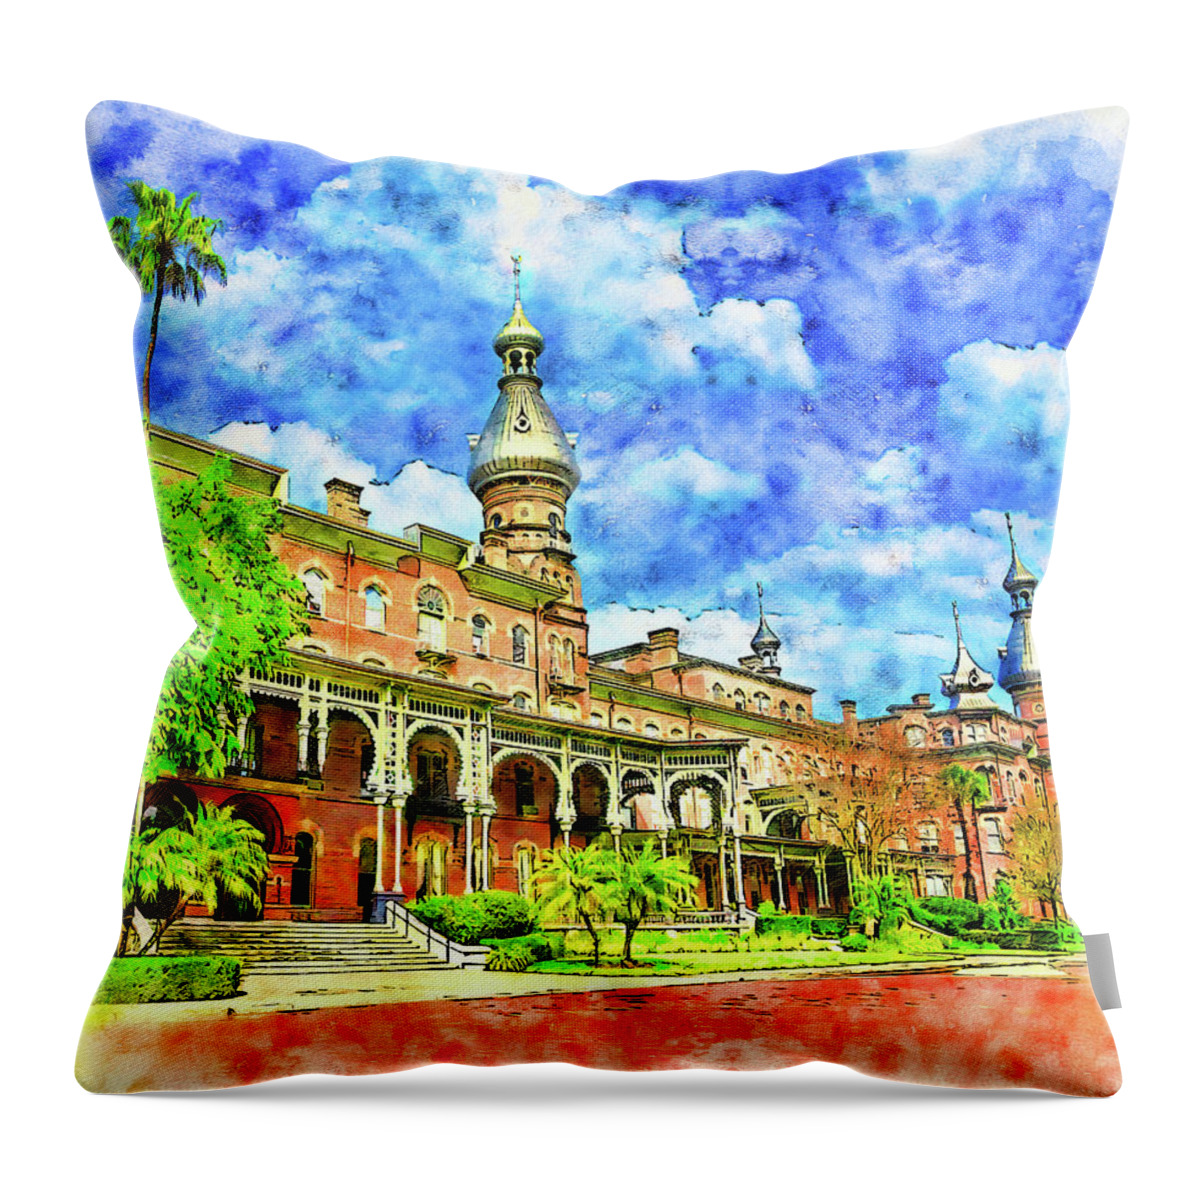 Henry B. Plant Museum Throw Pillow featuring the digital art Henry B. Plant Museum in Tampa, Florida - pen and watercolor by Nicko Prints